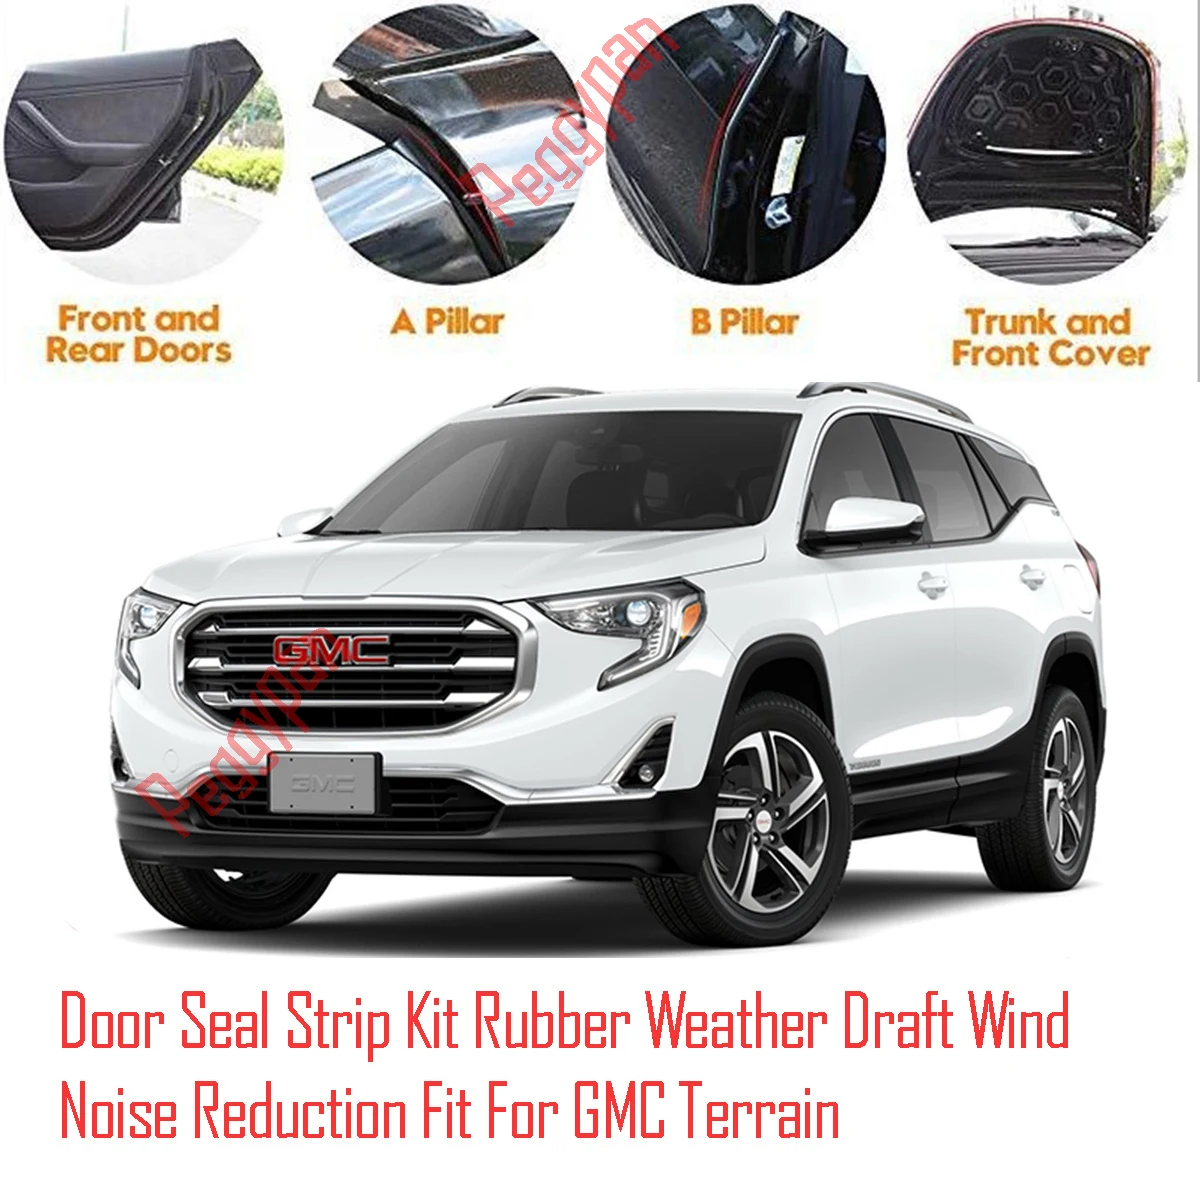 Door Seal Strip Kit Self Adhesive Window Engine Cover Soundproof Rubber Weather Draft Wind Noise Reduction Fit For GMC Terrain